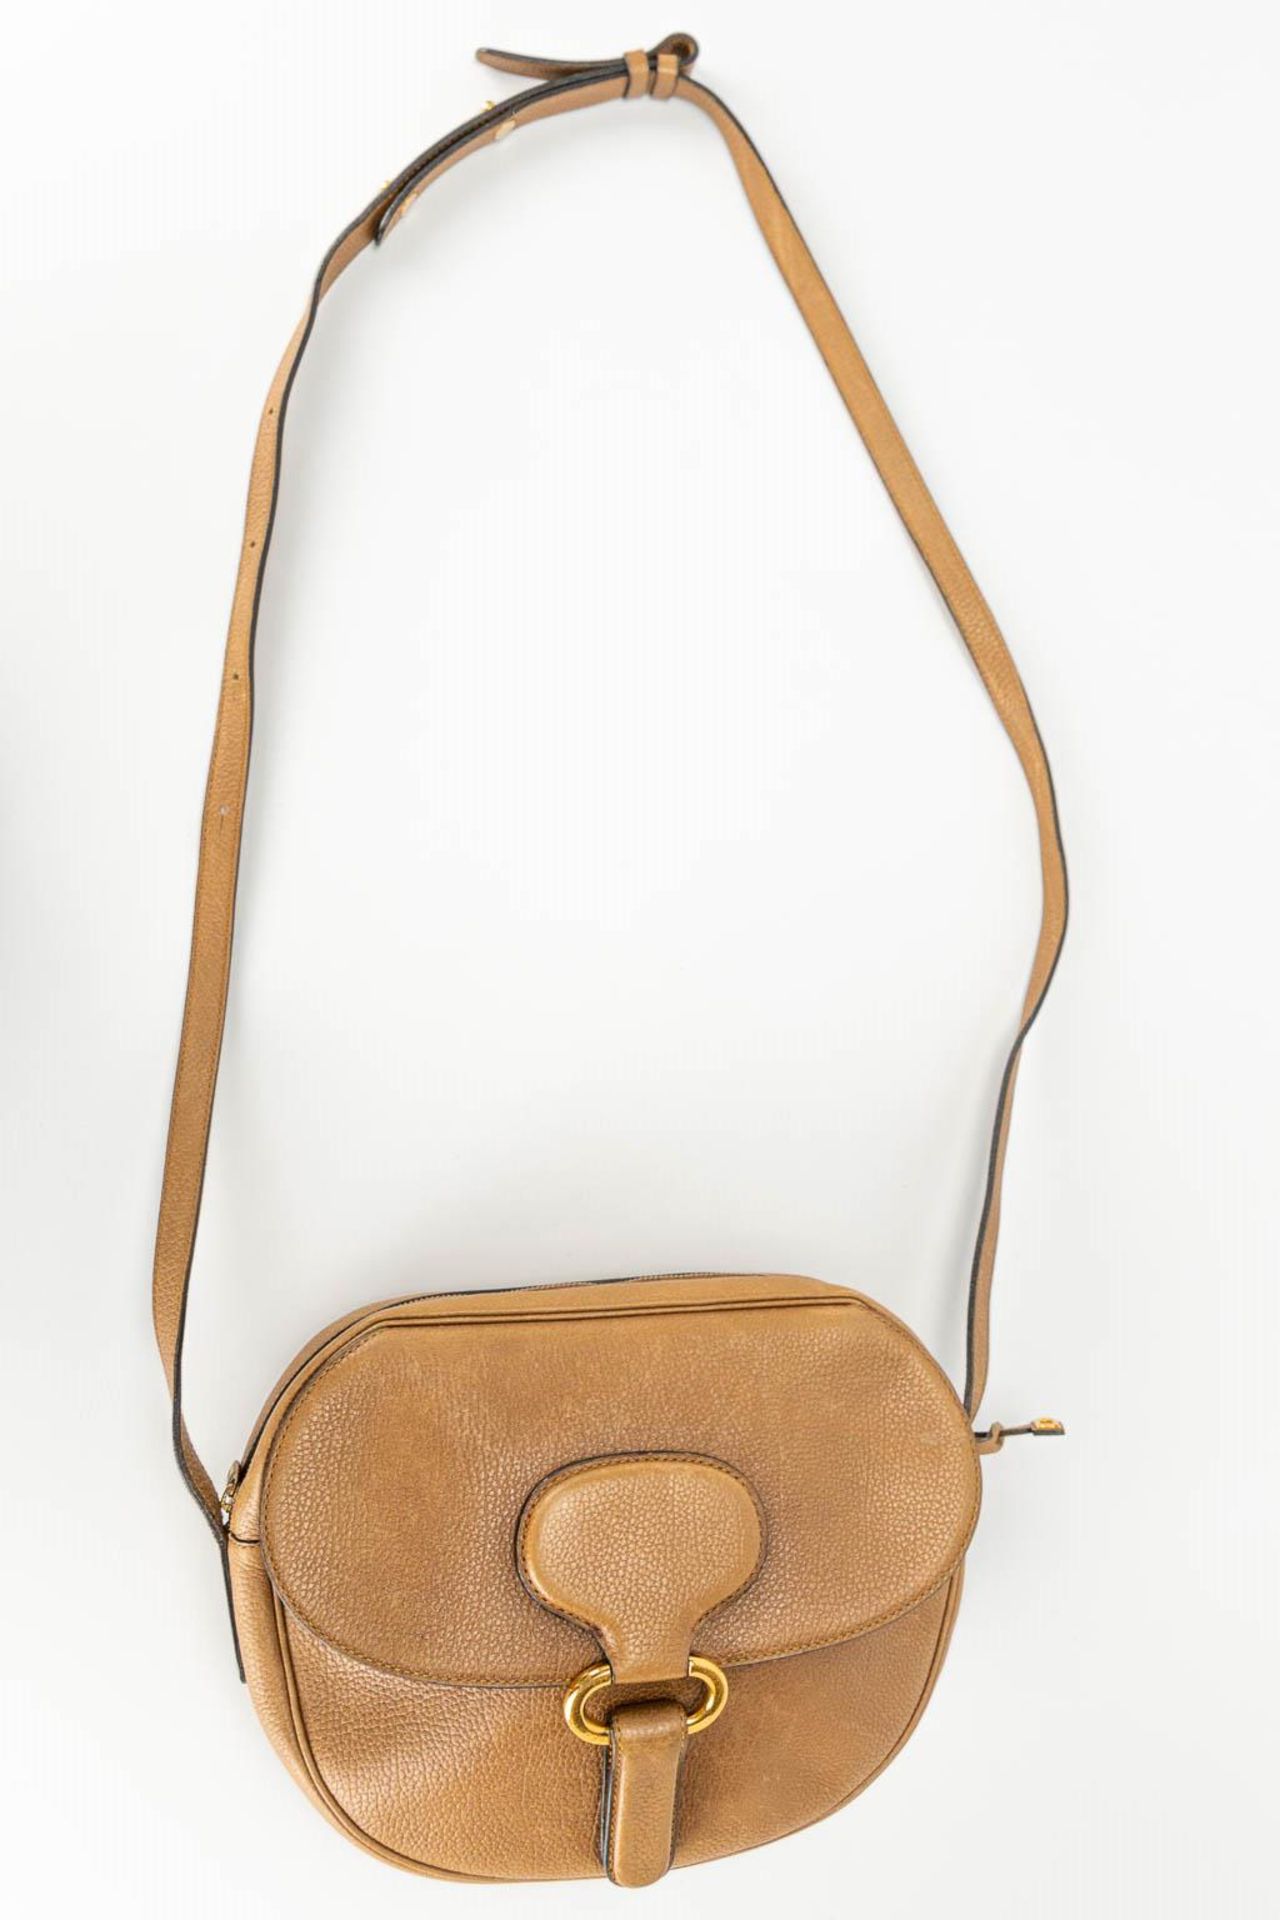 A purse made of brown leather and marked Delvaux - Image 3 of 14